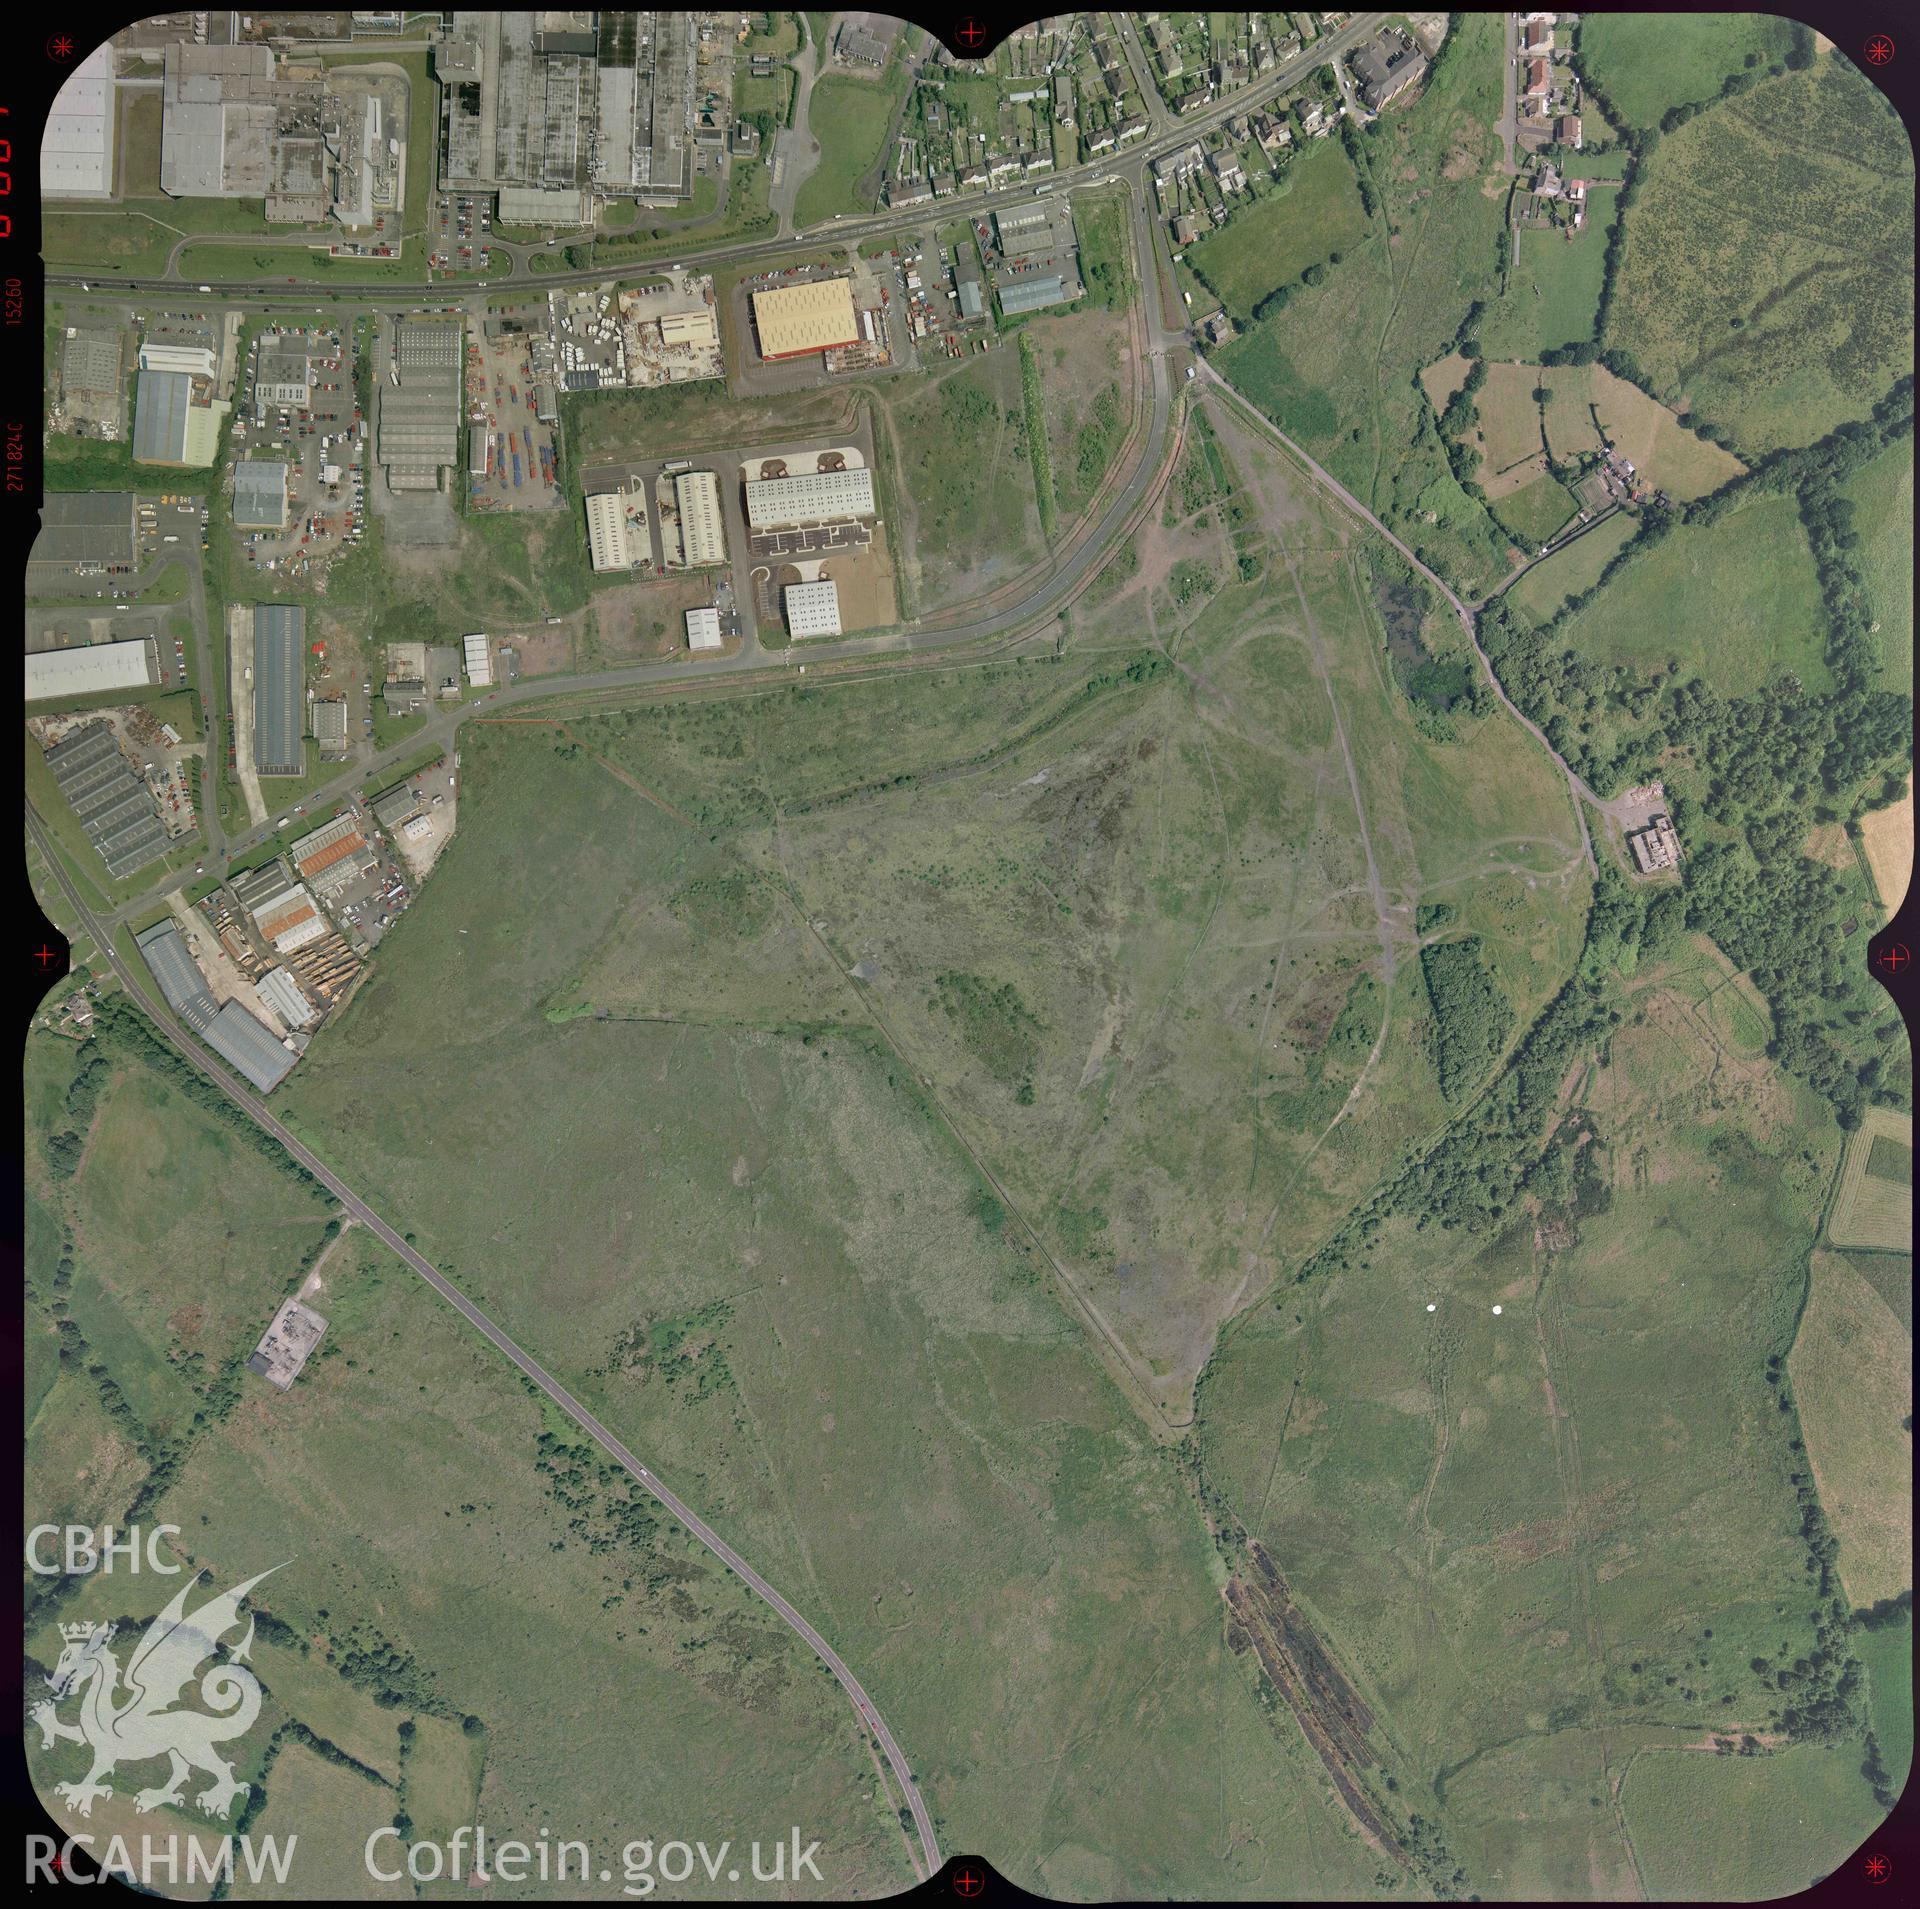 Digitised colour aerial photograph taken in May 1992. Part of material used in a Setting Impact Assessment of Land off Phoenix Way, Garngoch Business Village, Swansea, carried out by Archaeology Wales, 2018. Project number P2631.